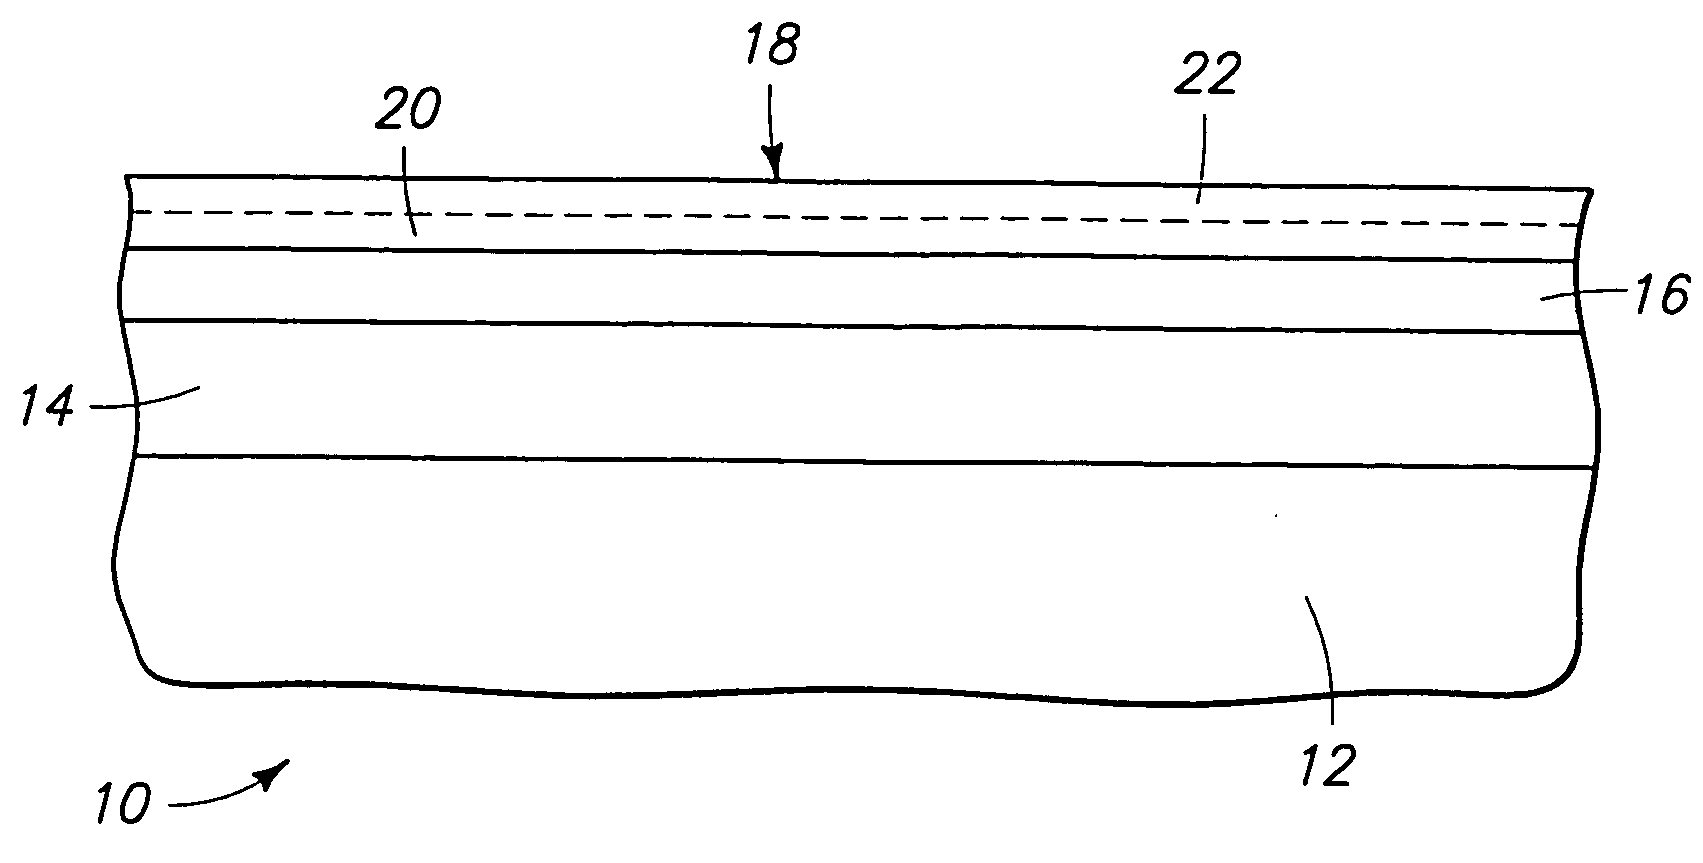 Chemical vapor deposition methods and physical vapor deposition methods